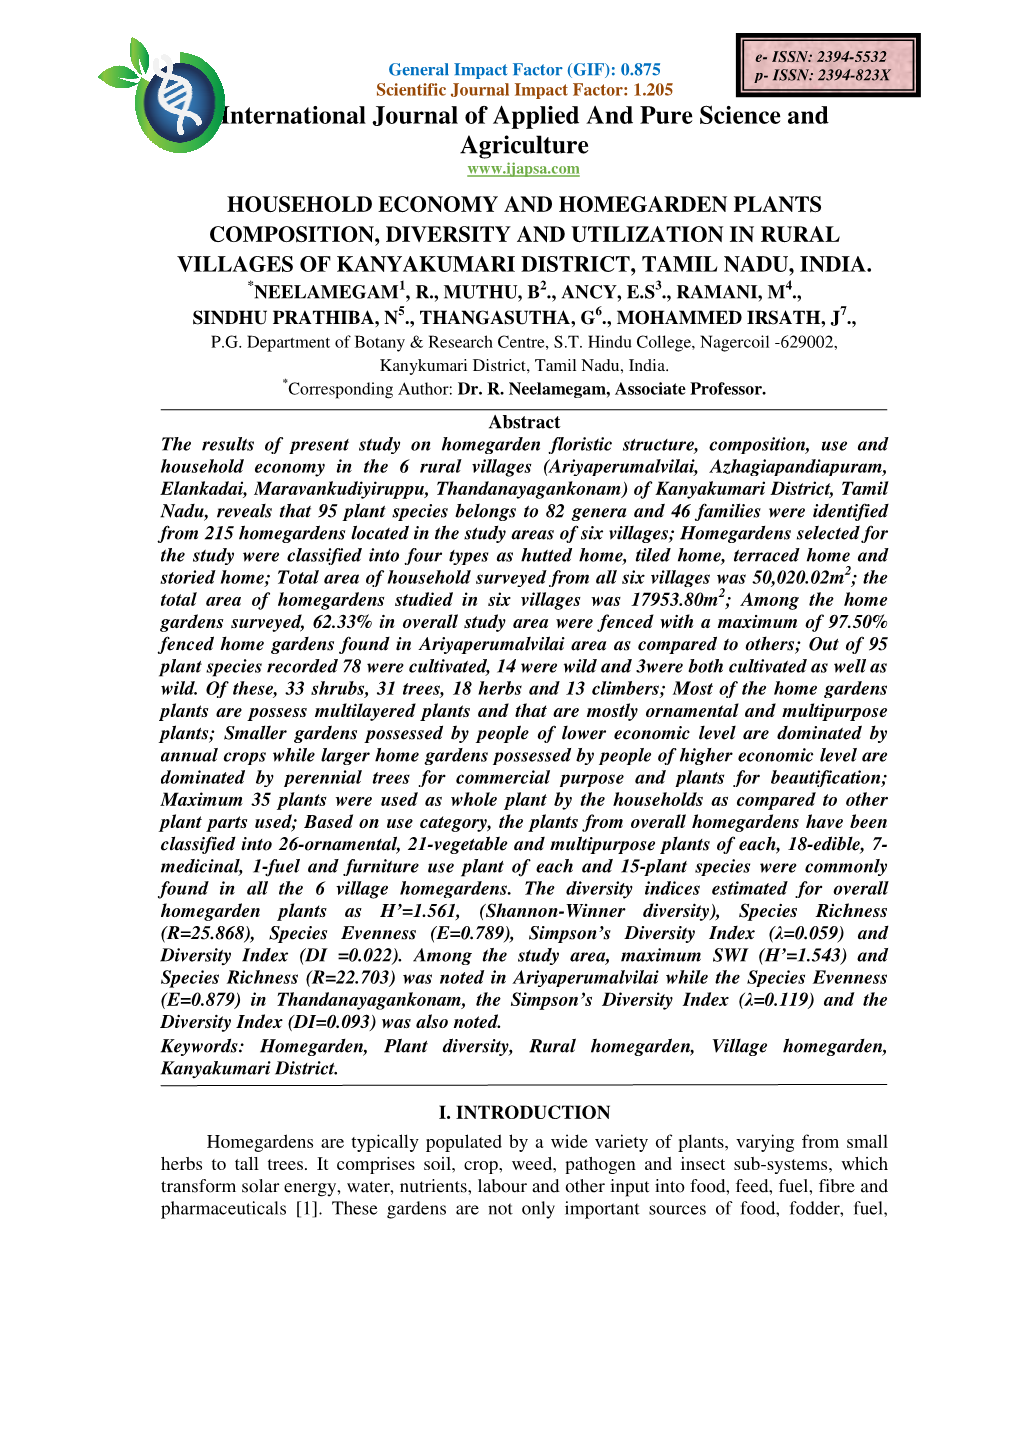 Household Economy and Homegarden Plants Composition, Diversity and Utilization in Rural Villages of Kanyakumari District, Tamil Nadu , India